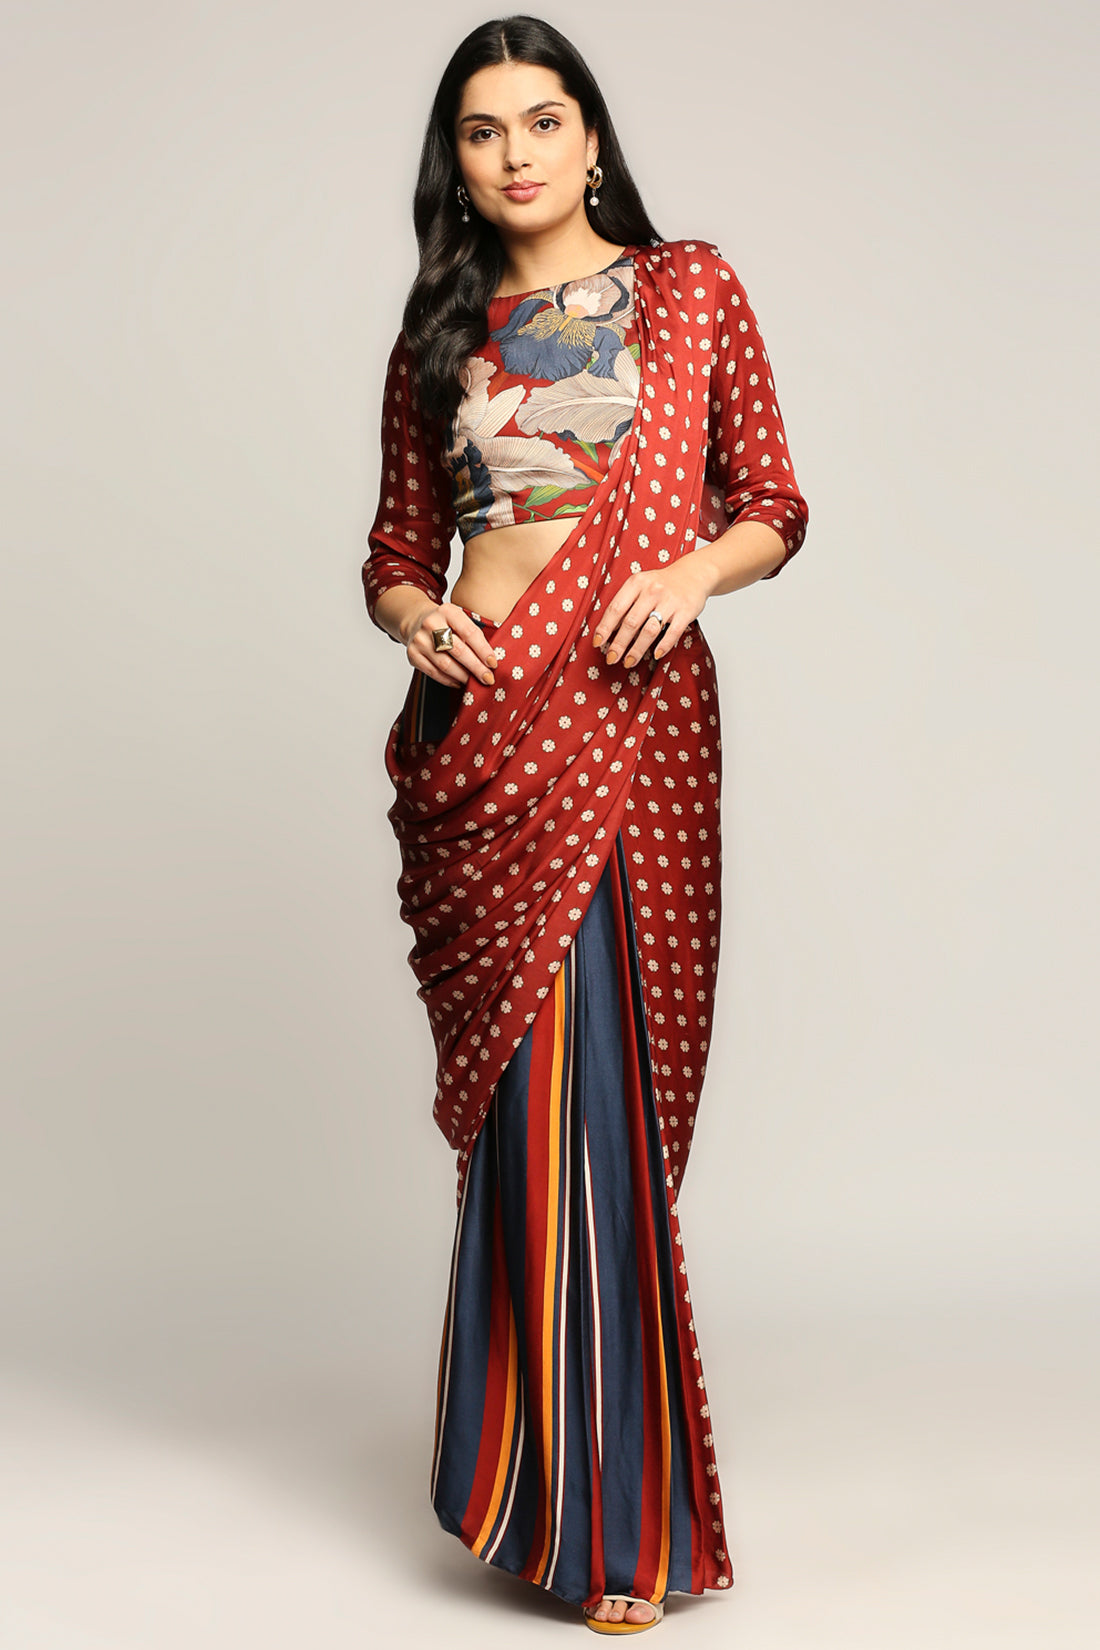 Orchid Bloom Printed Pre-Stitched Saree With Blouse